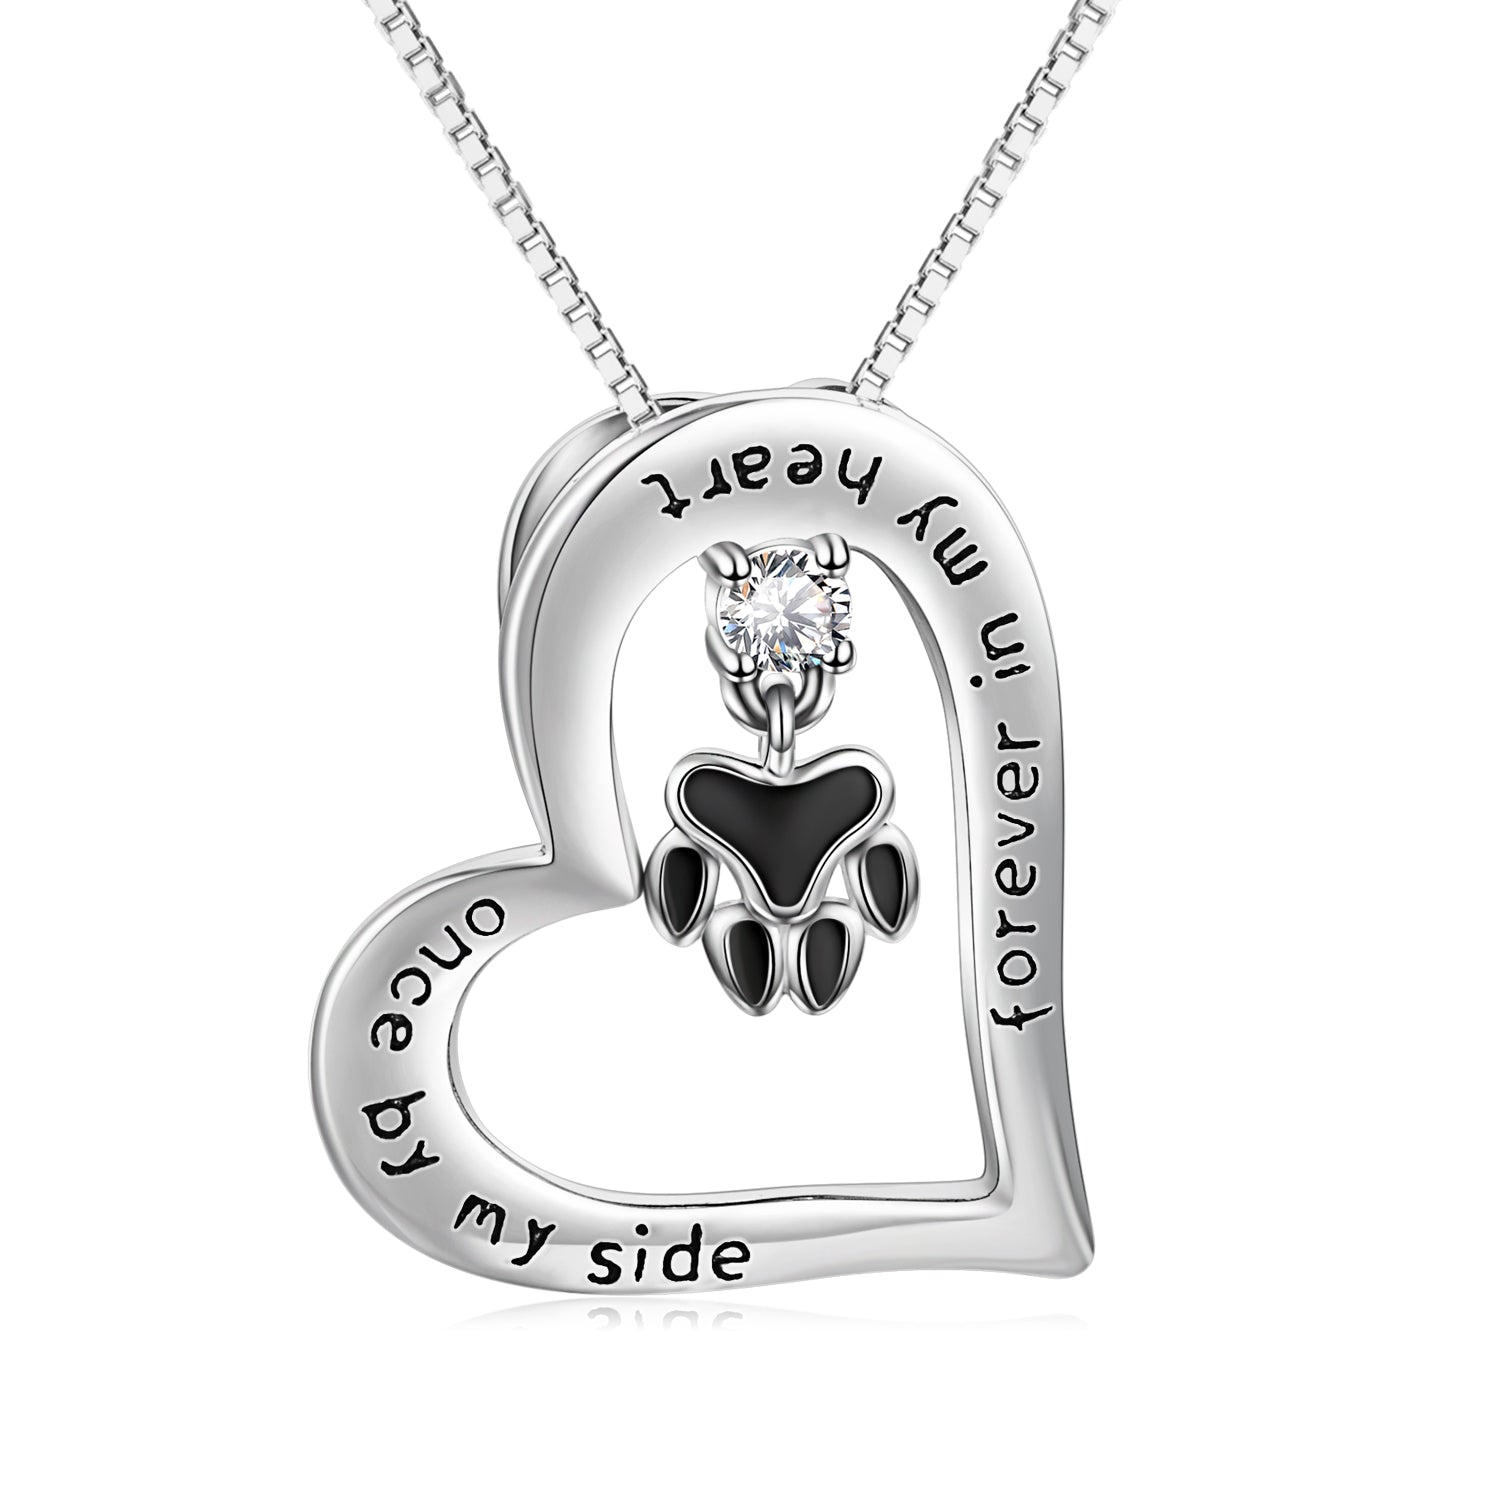 Dog Claw Love Necklace Forever In My Heart Once In My Side Necklace